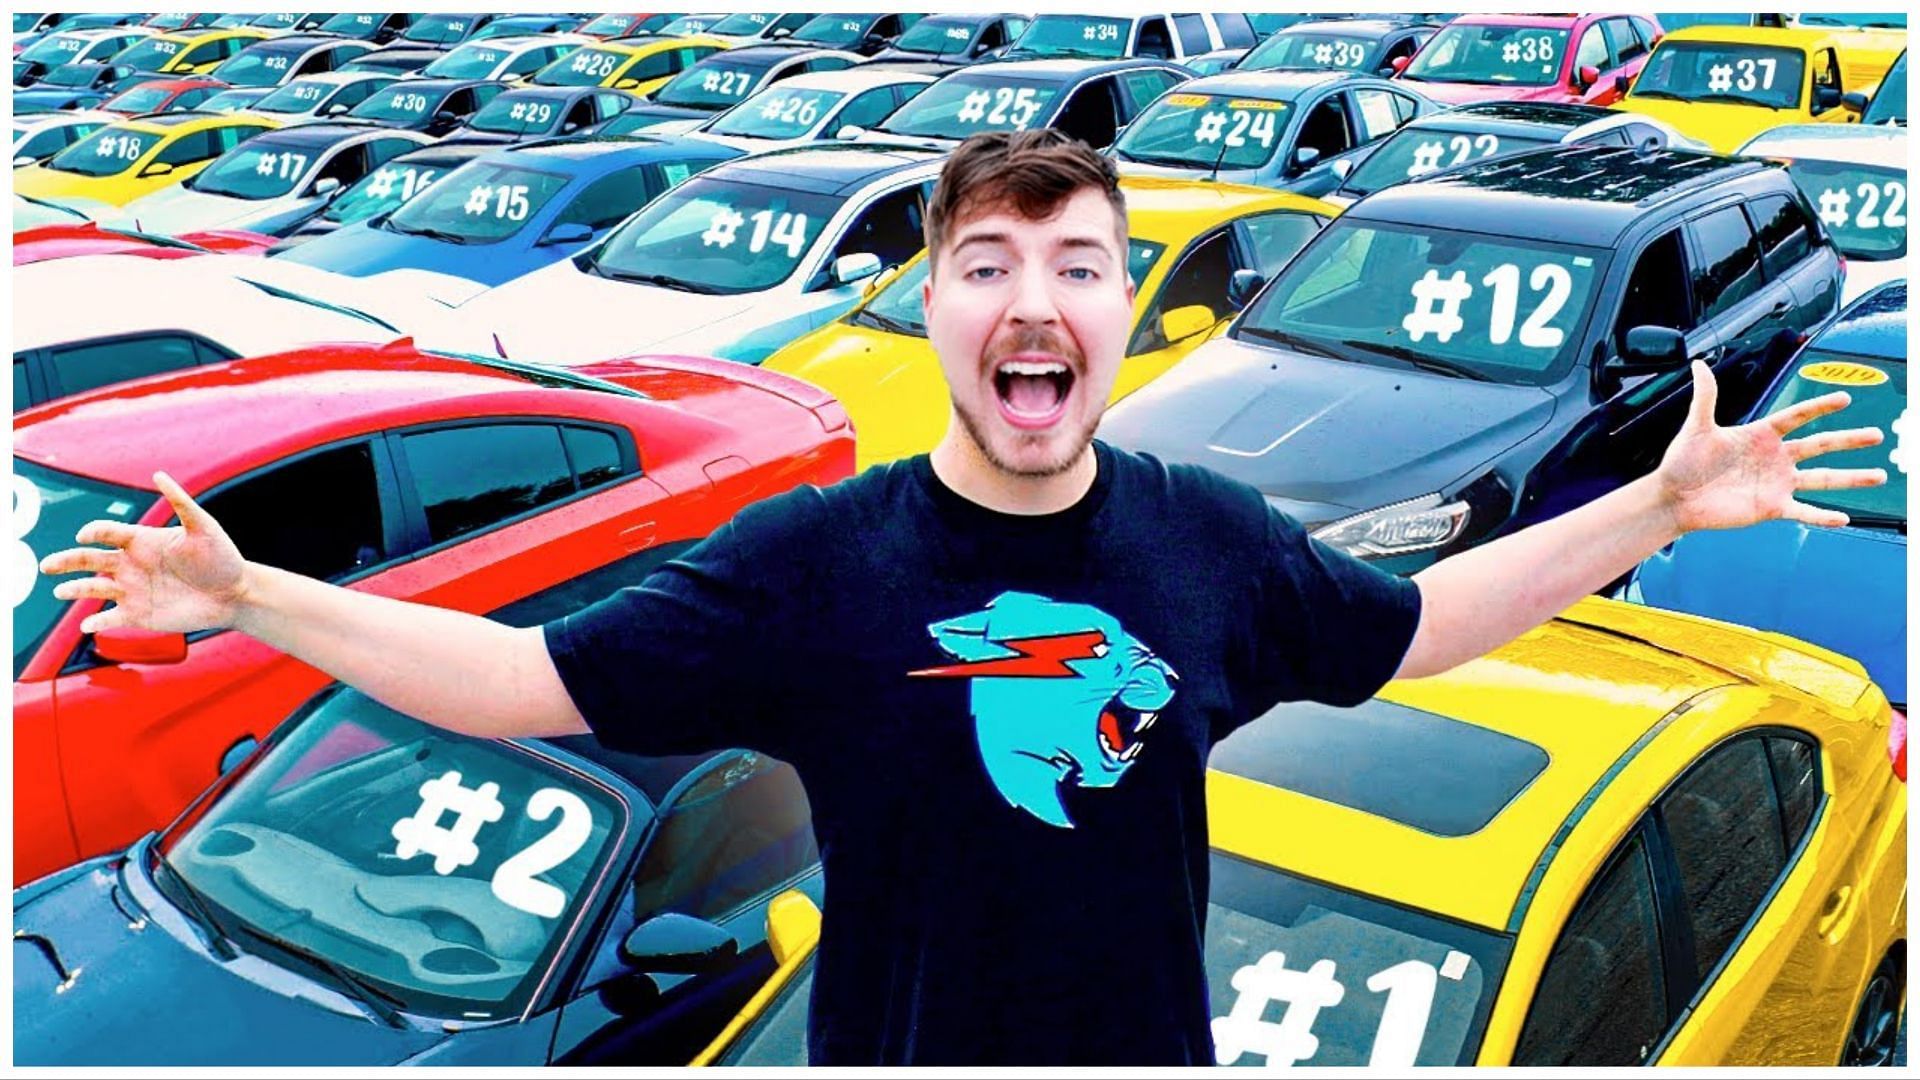 MrBeast released unused footage of him offering to remove the branding from a car he gave away (Image via YouTube)